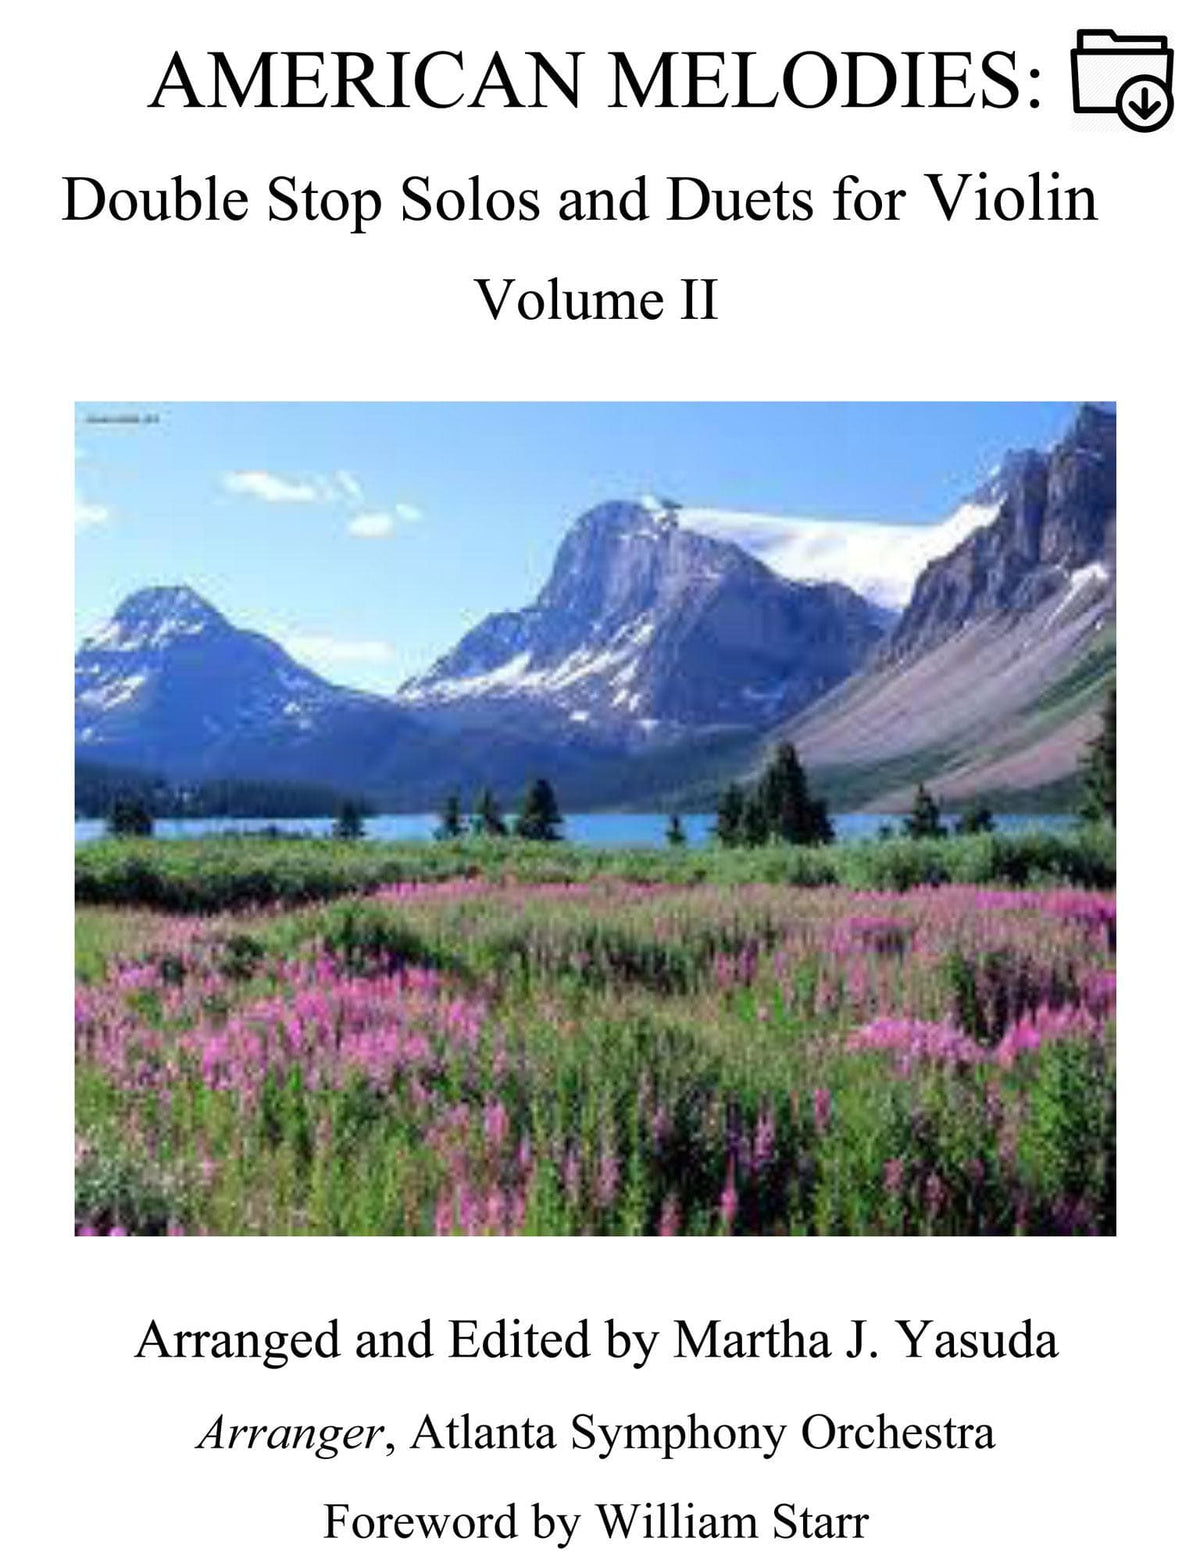 Yasuda, Martha - American Melodies: Double Stop Solos and Duets For Violin, Volume II - Digital Download